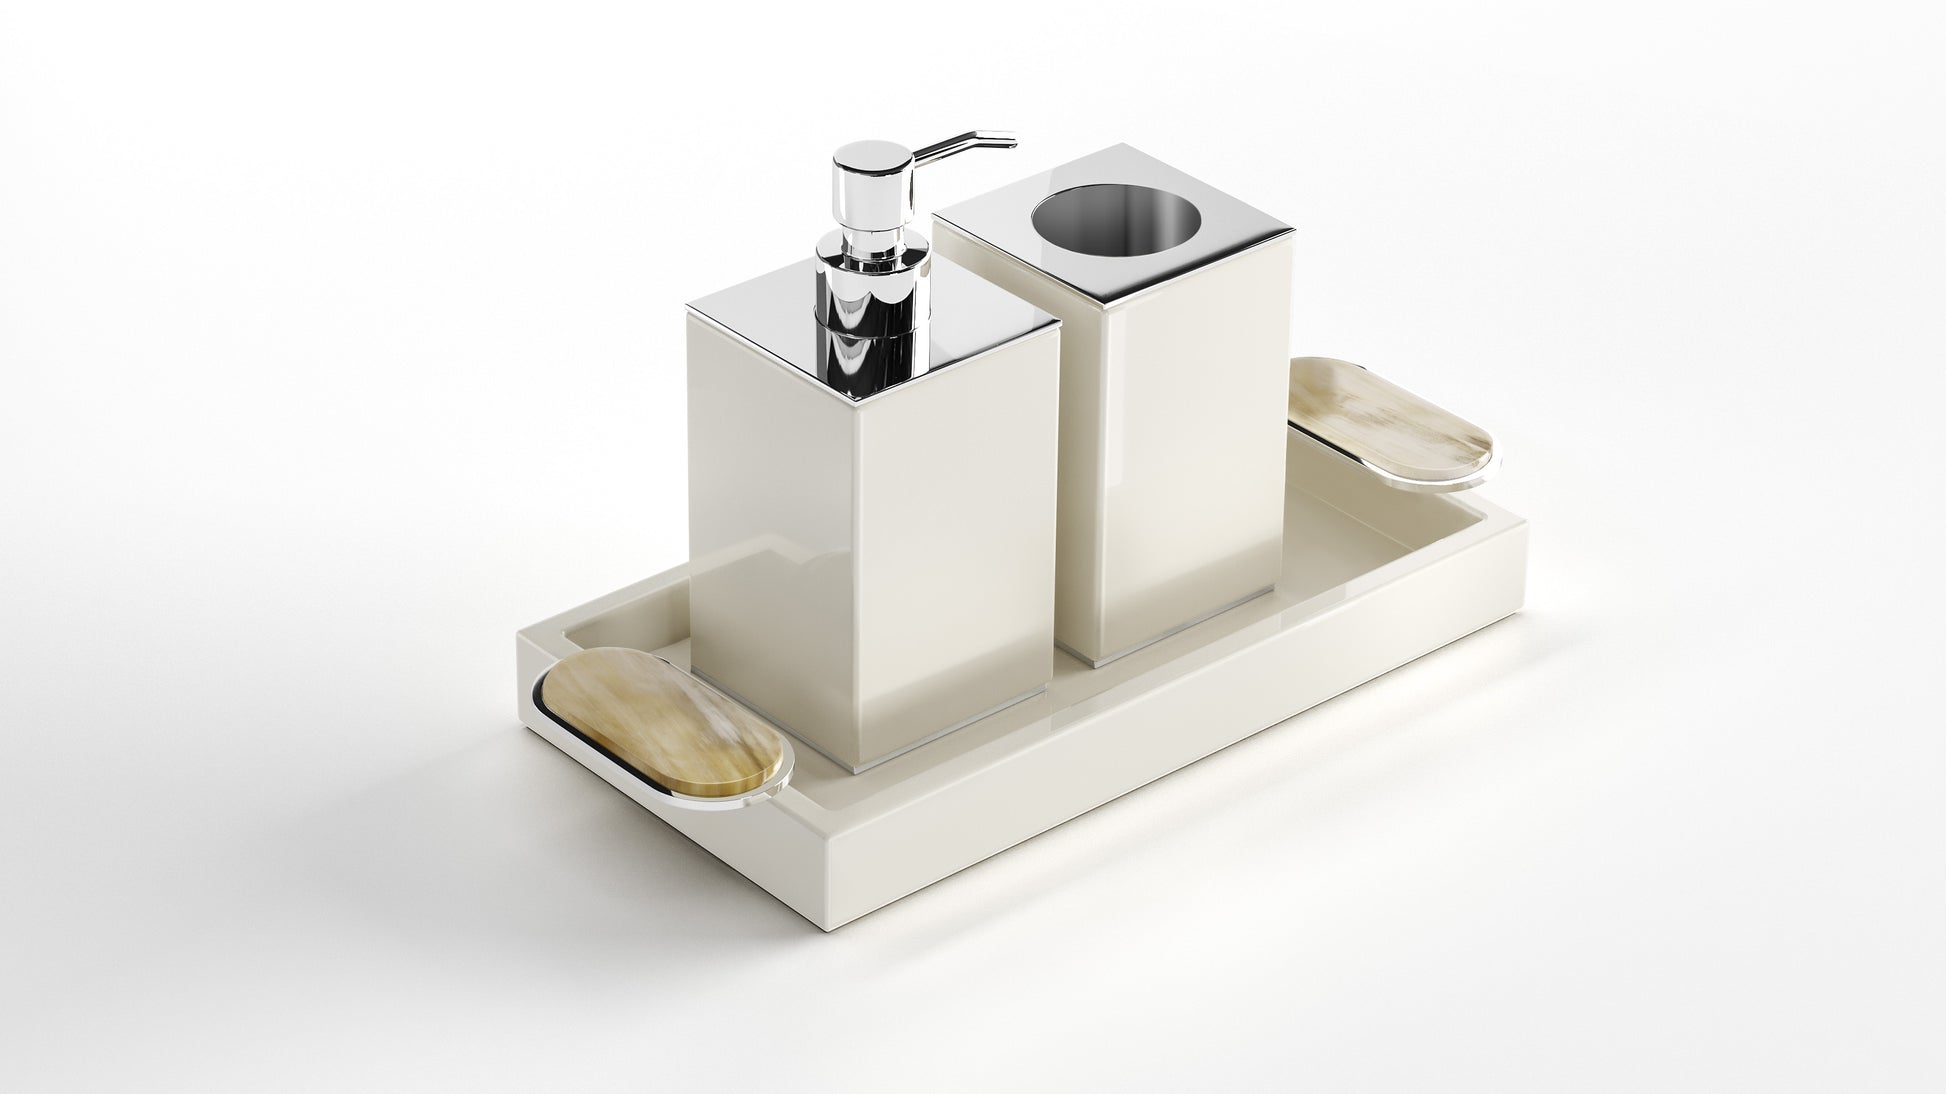 Arcahorn Argentella Valet Tray | Wood with Lacquered Ivory Gloss Finish | Handles in Horn and Chromed Brass | Elegant Organizer for Daily Essentials | Perfect for Yacht Decor | Explore a Range of Luxury Home Accessories at 2Jour Concierge, #1 luxury high-end gift & lifestyle shop